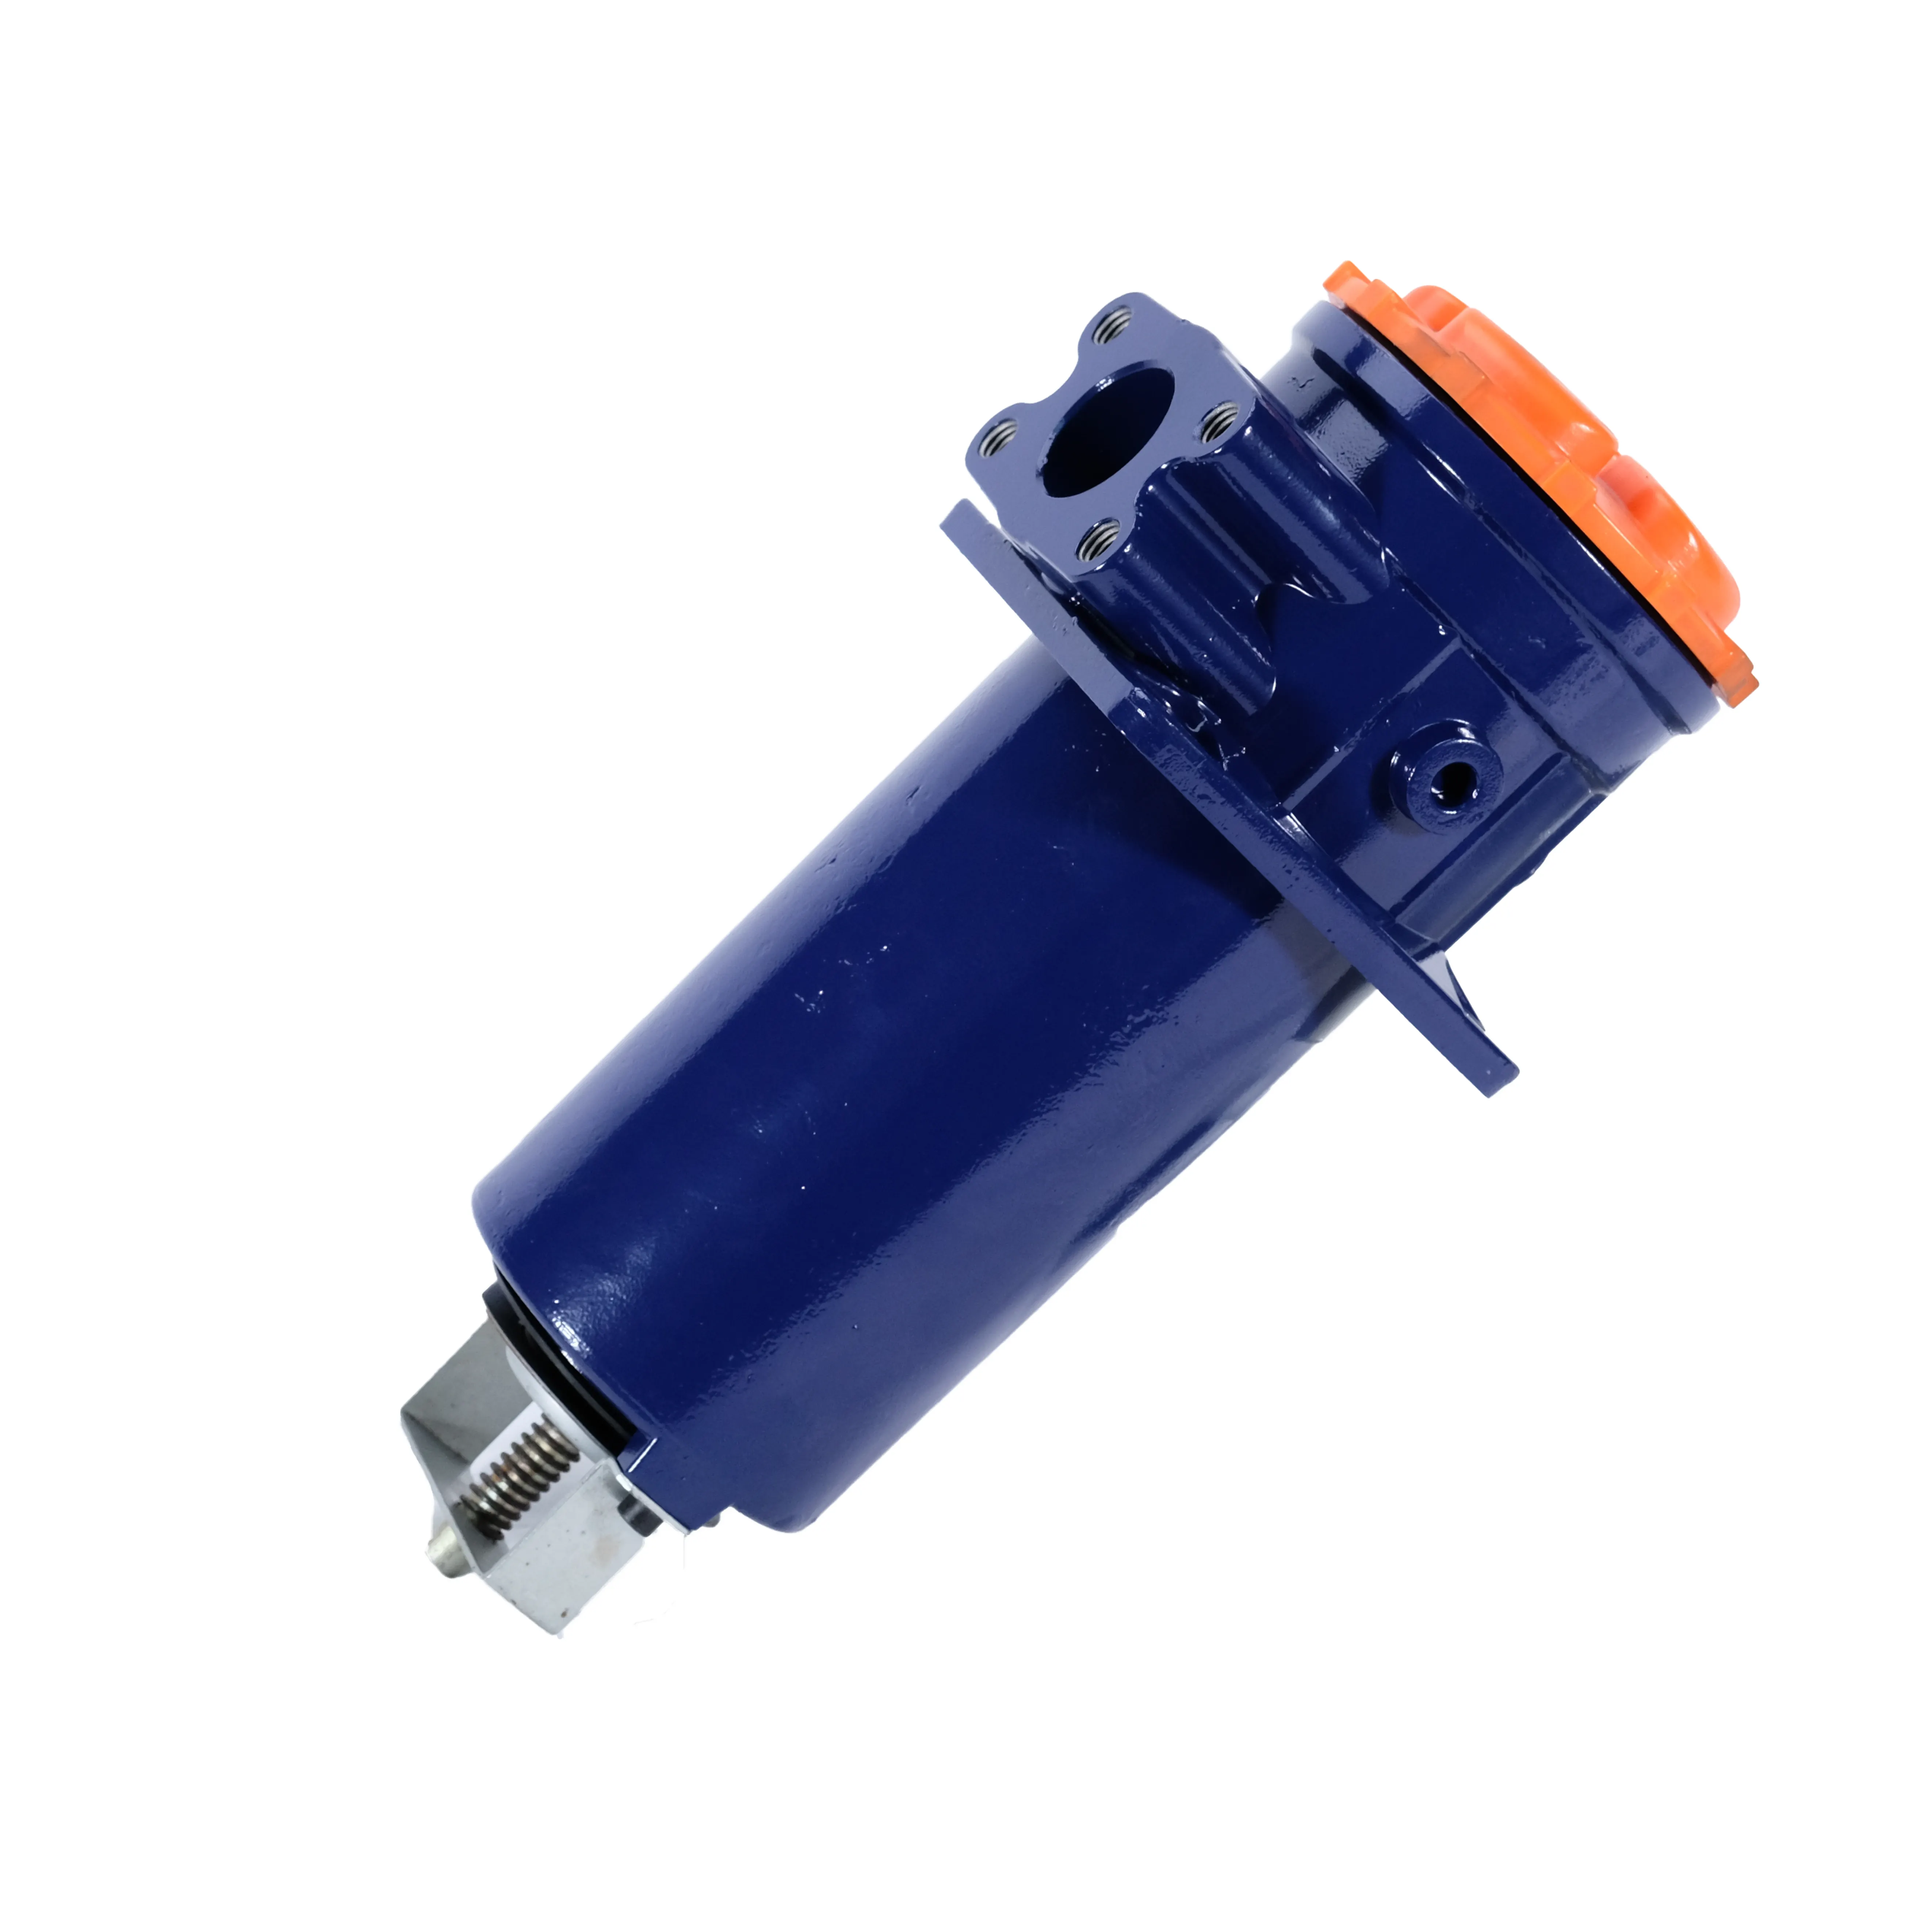 RF2250 A F2 E A20 P01 ,Magnetic hydraulic oil tank return oil filter to absorb iron particles in hydraulic oil